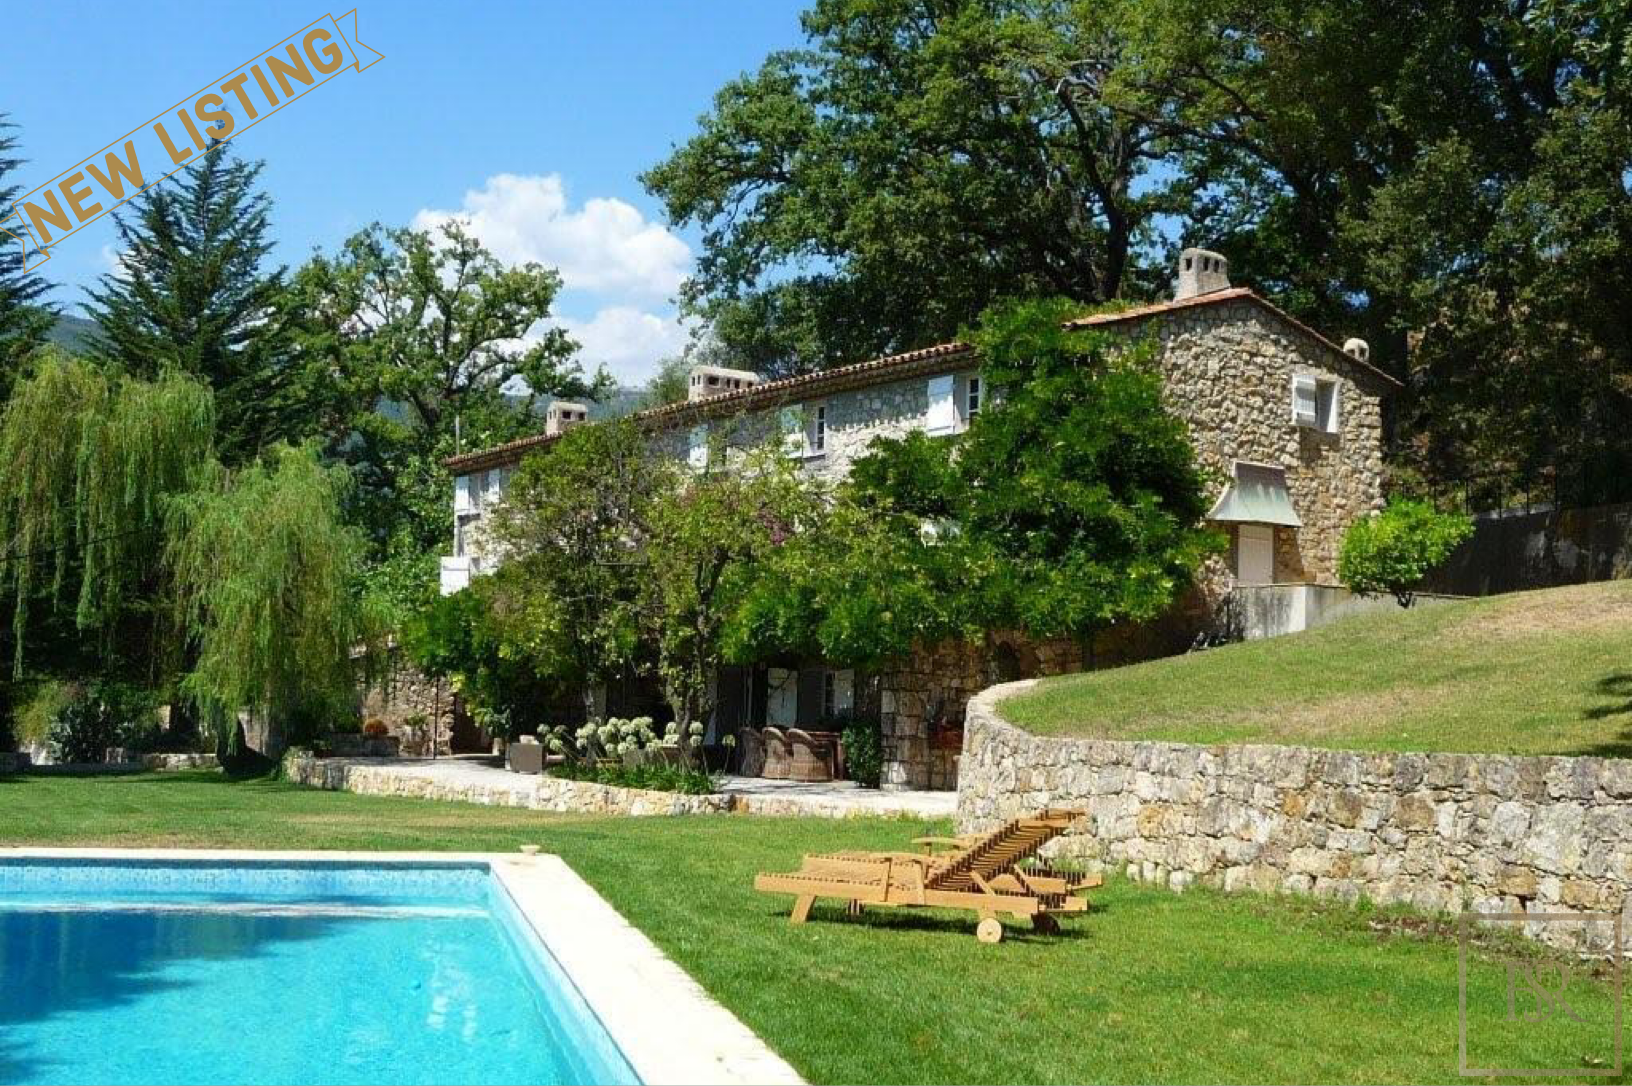 Farmhouse Century - Châteauneuf de Grasse, French Riviera for sale For Super Rich